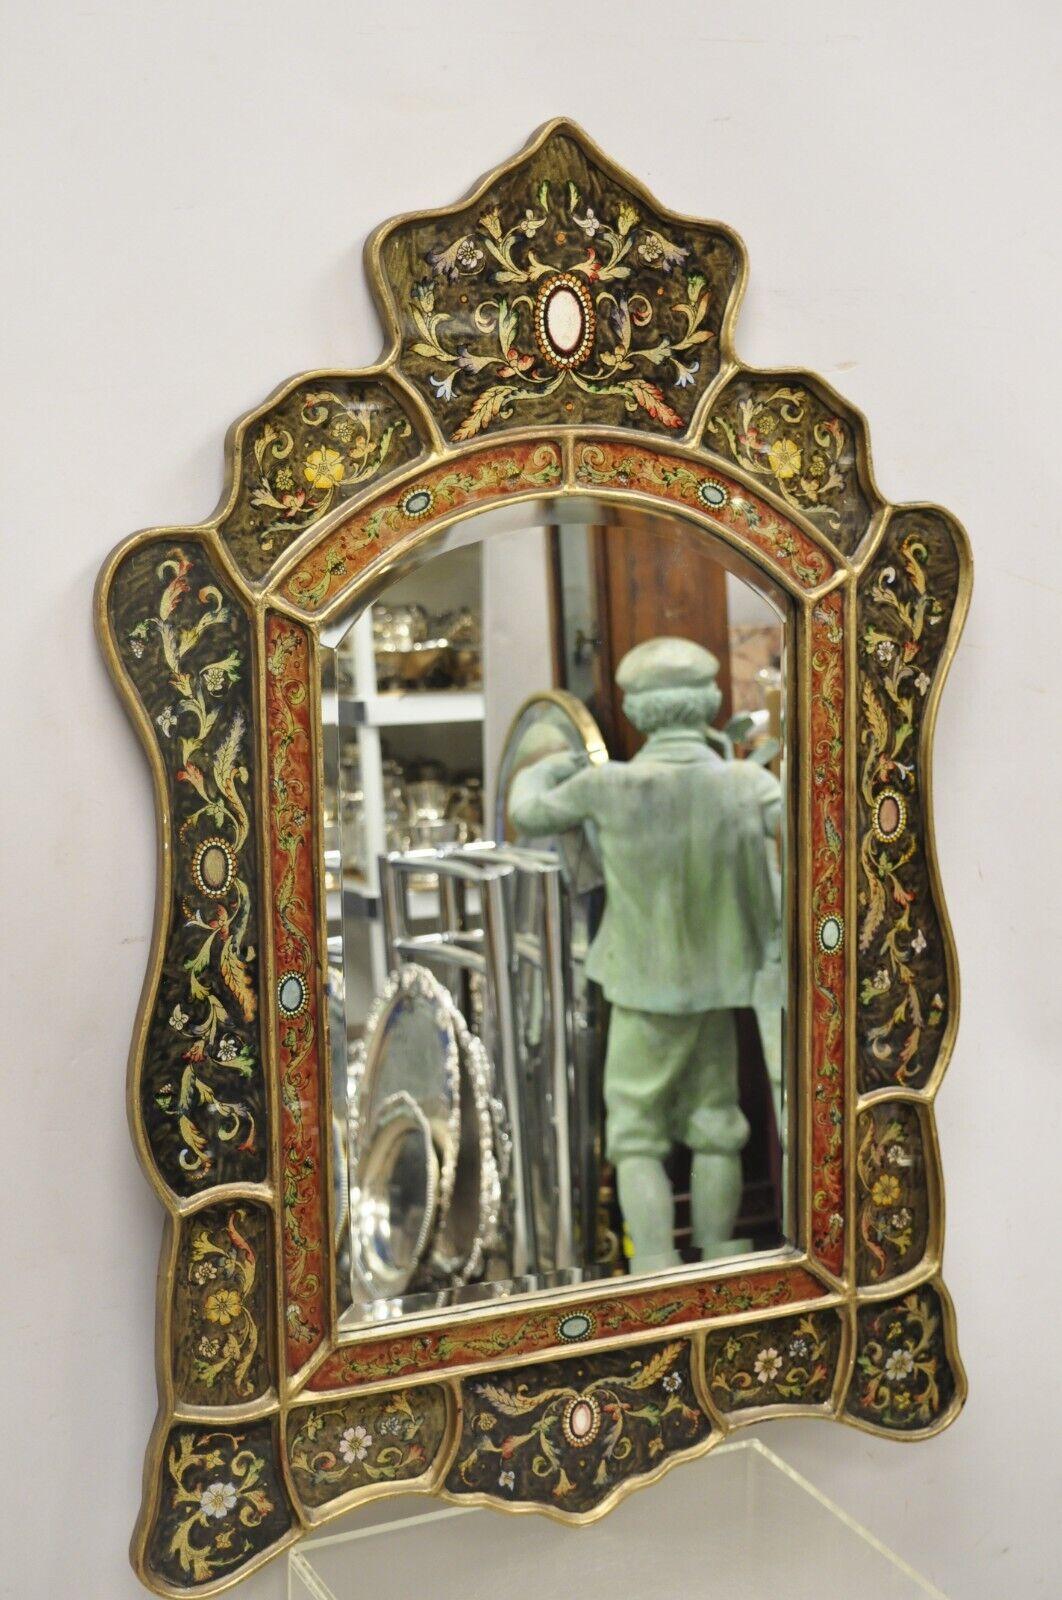 Decorator Venetian Style Painted Leafy Scroll Mirrored Frame Wall Mirror. Item features a reverse painted frame, glass border, very nice item, great style and form. Circa Late 20th - Early 21st Century. Measurements: 40.5